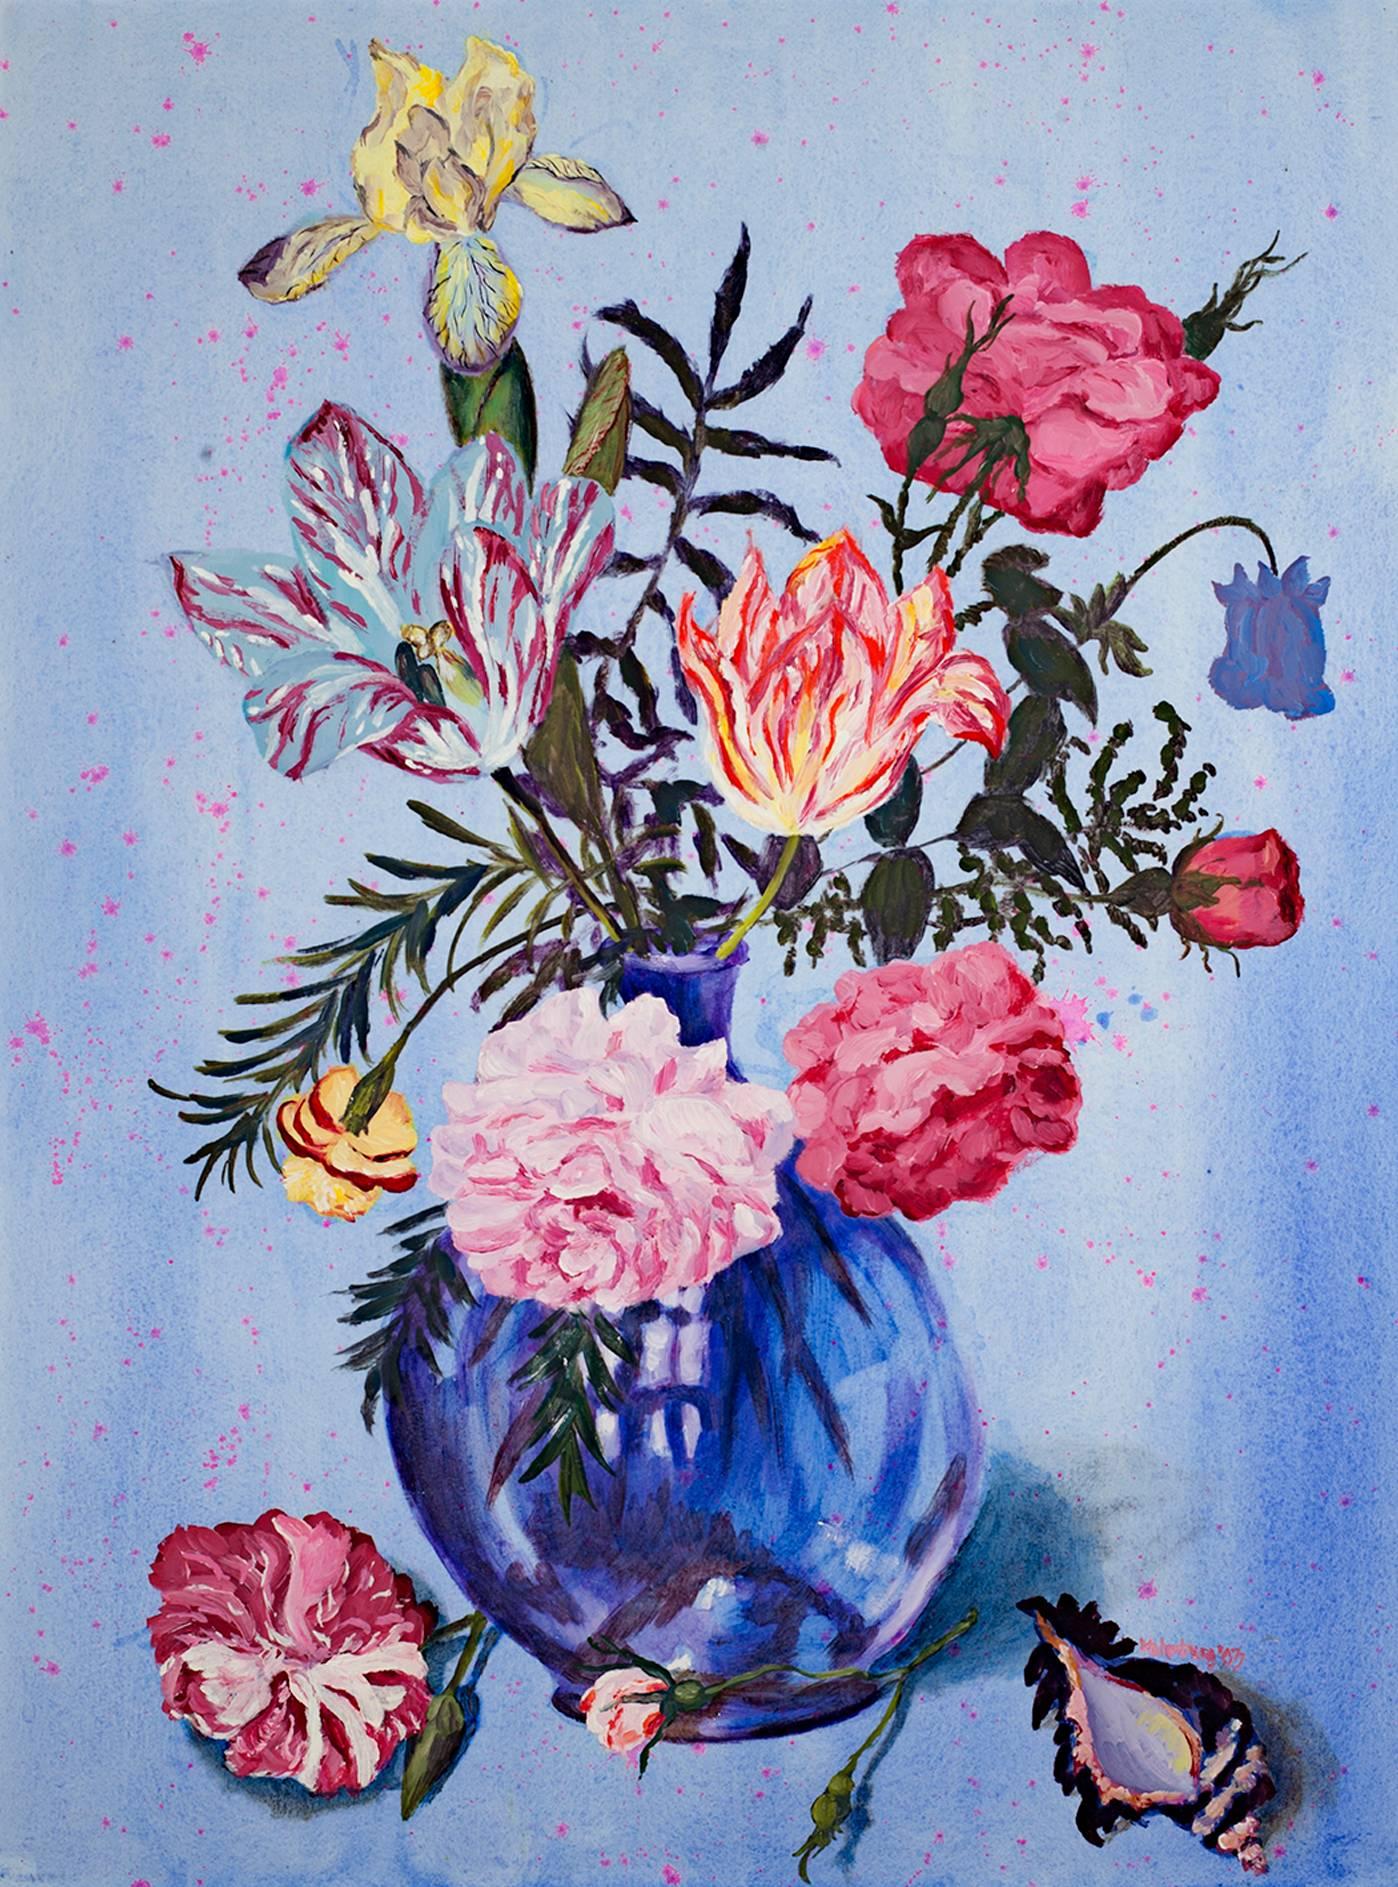 "Assortment of Flowers in Blue Vase," Mixed Media signed by Catherine Holmburg